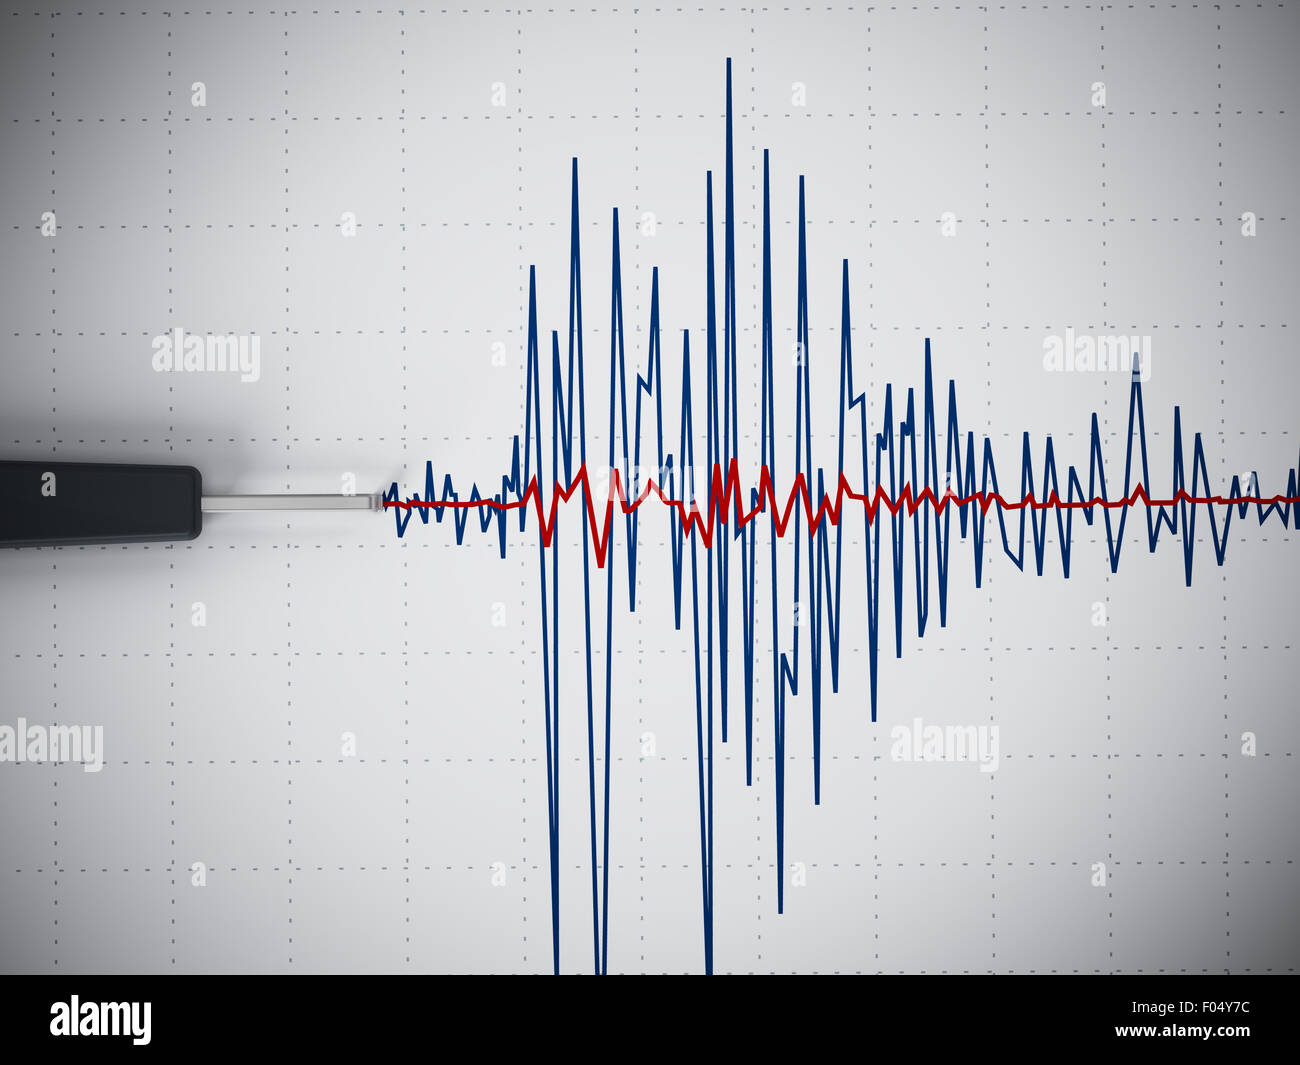 Seismic activity graph showing an earthquake. Stock Photo